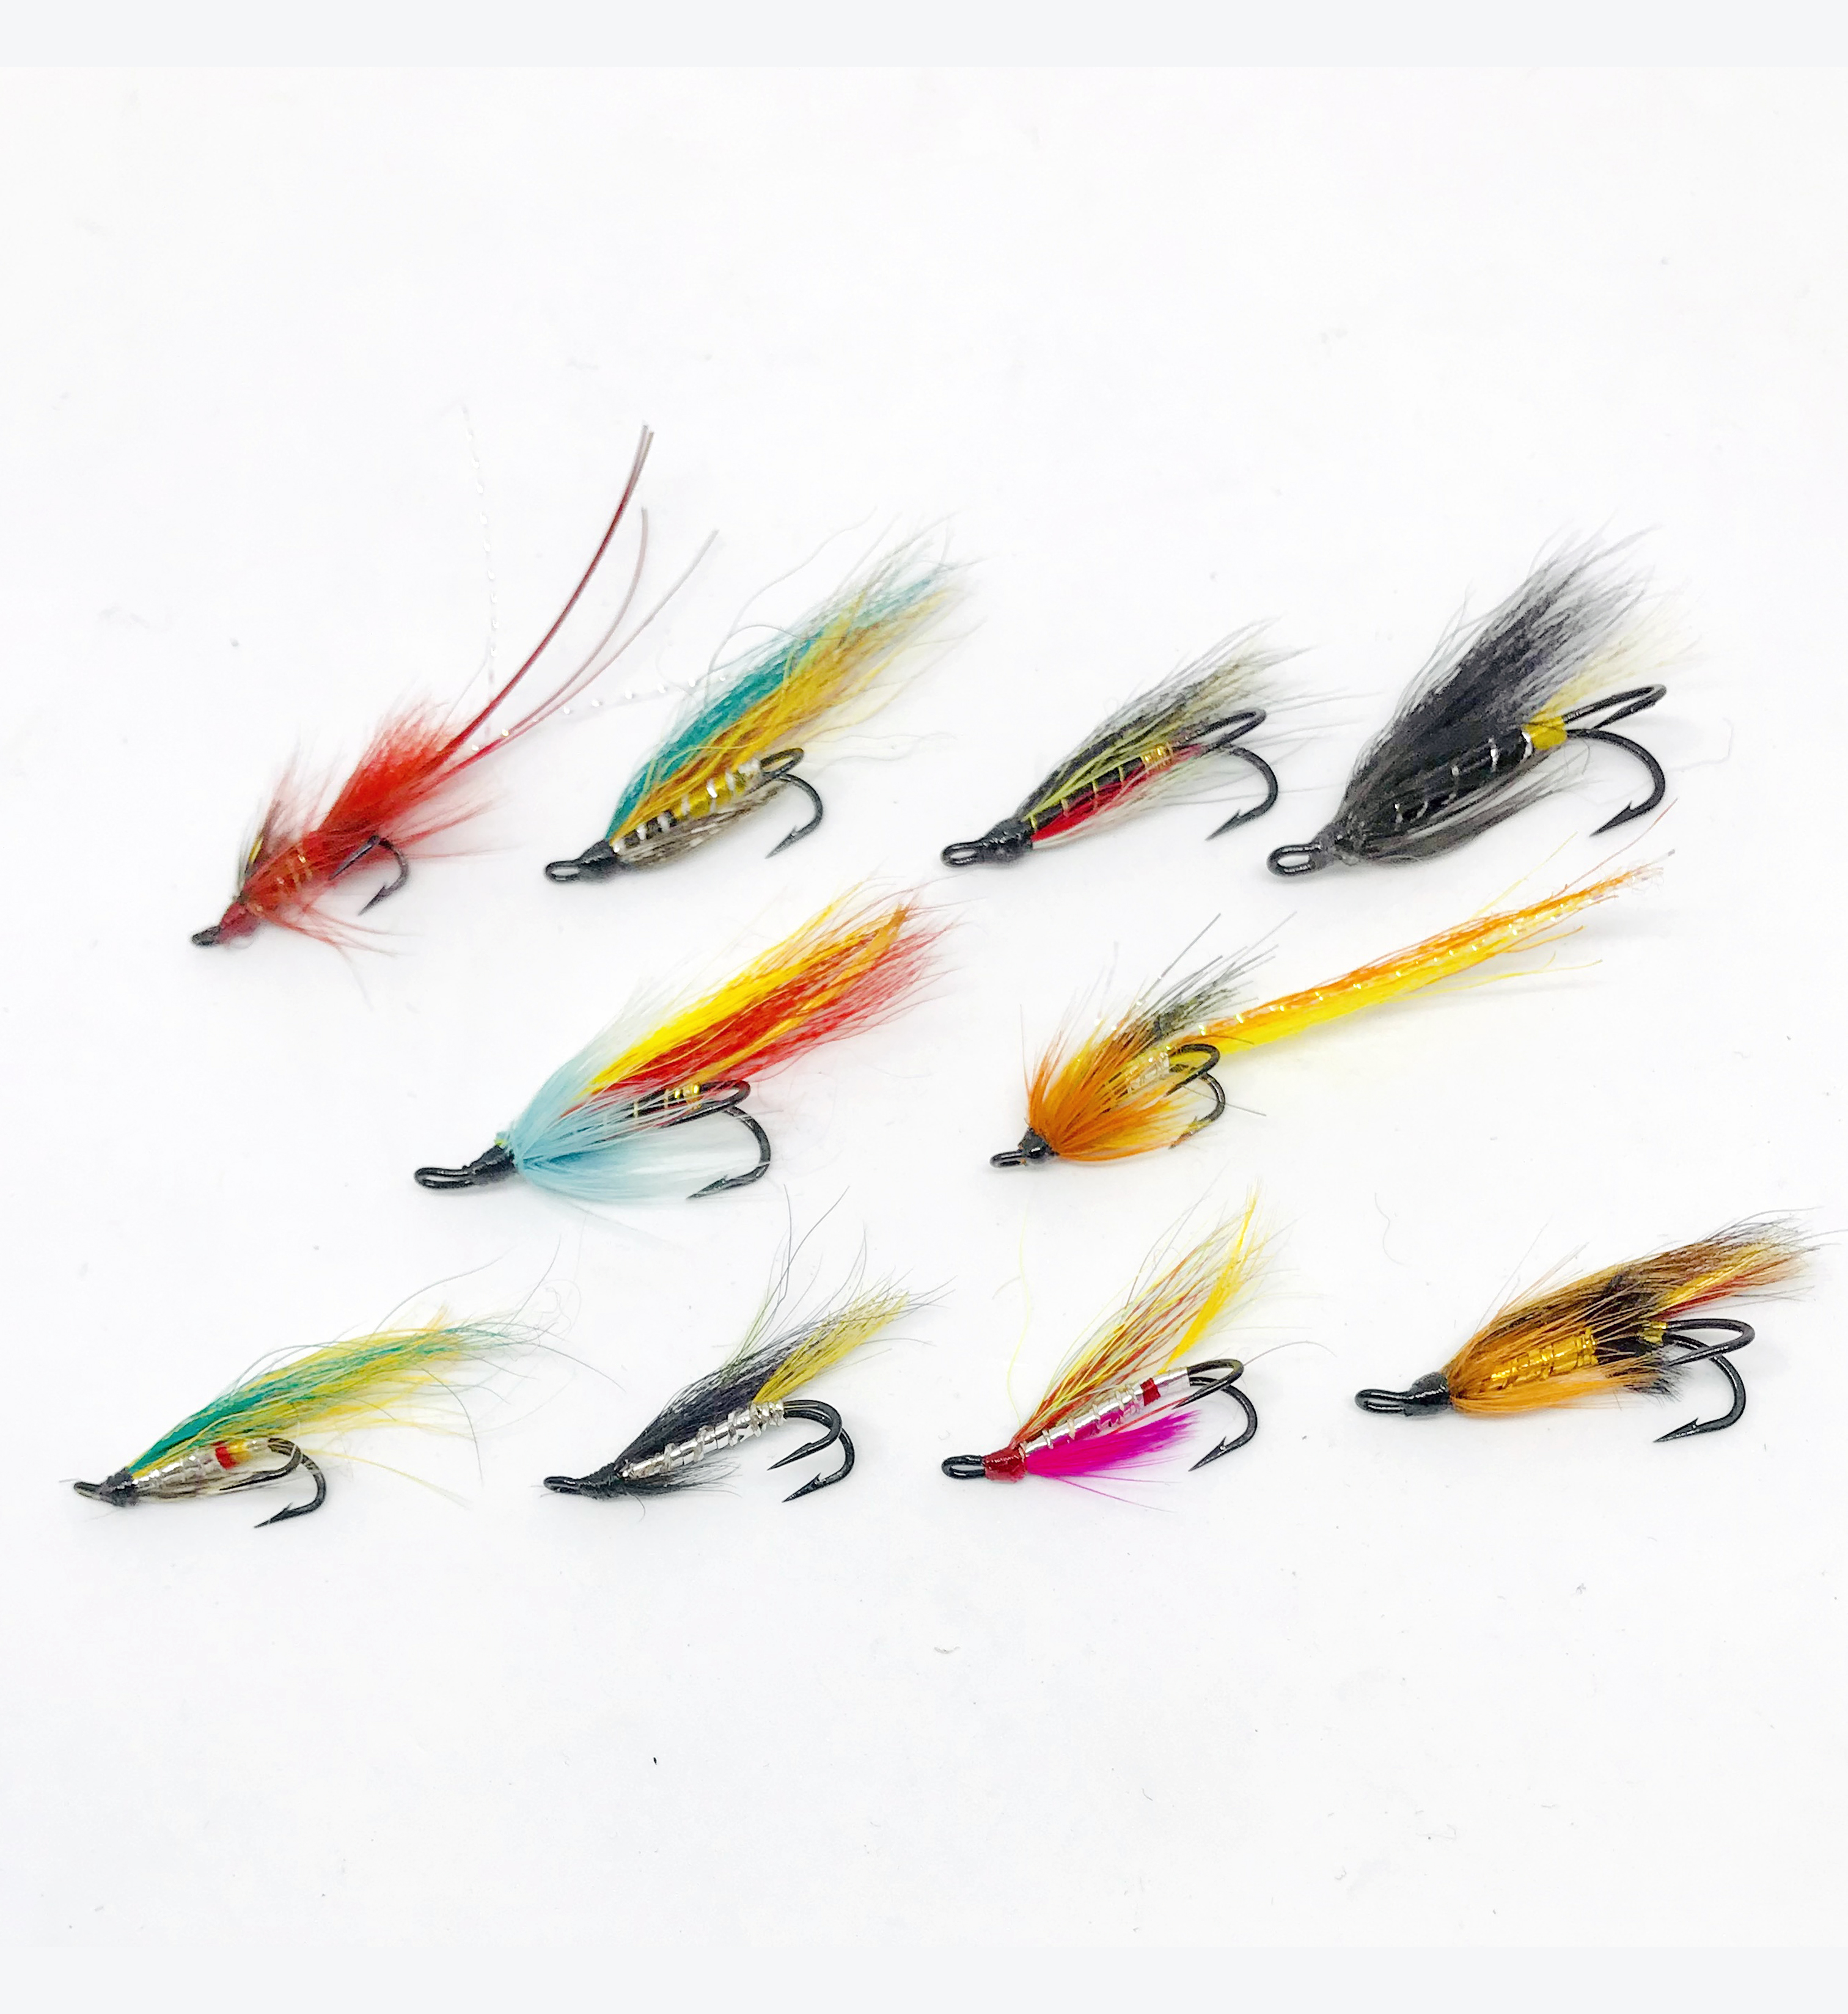 Fly Fishing Salmon flies ALLYS Purple size 6-8 DOUBLES pack of 6 #153